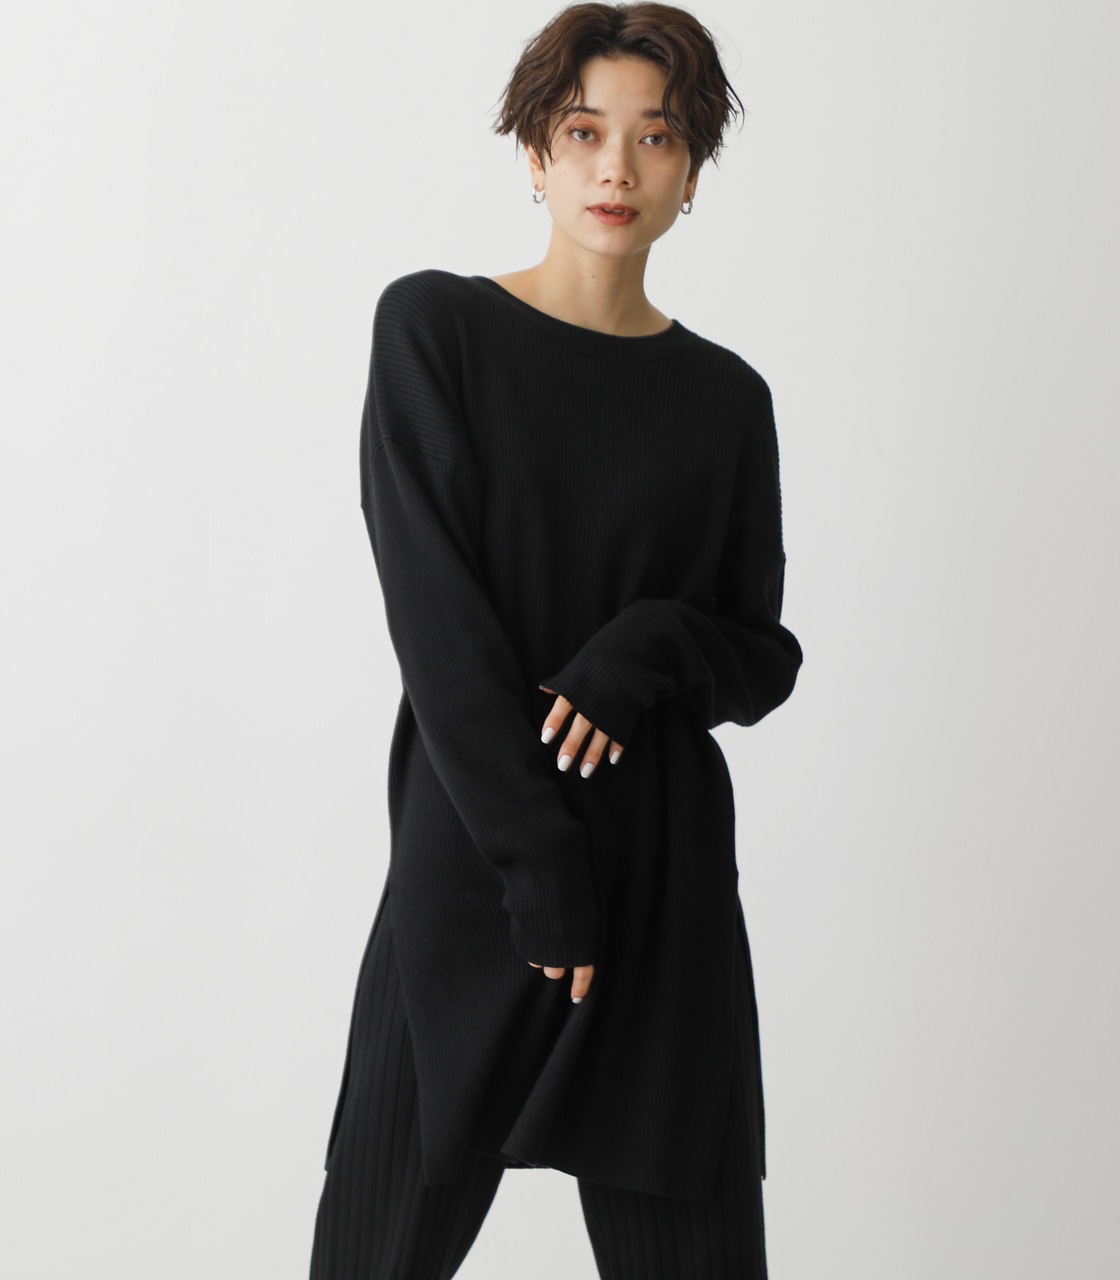 2WAY RIB KNIT LONG TOPS/2WAYリブニットロングトップス 詳細画像 BLK 2